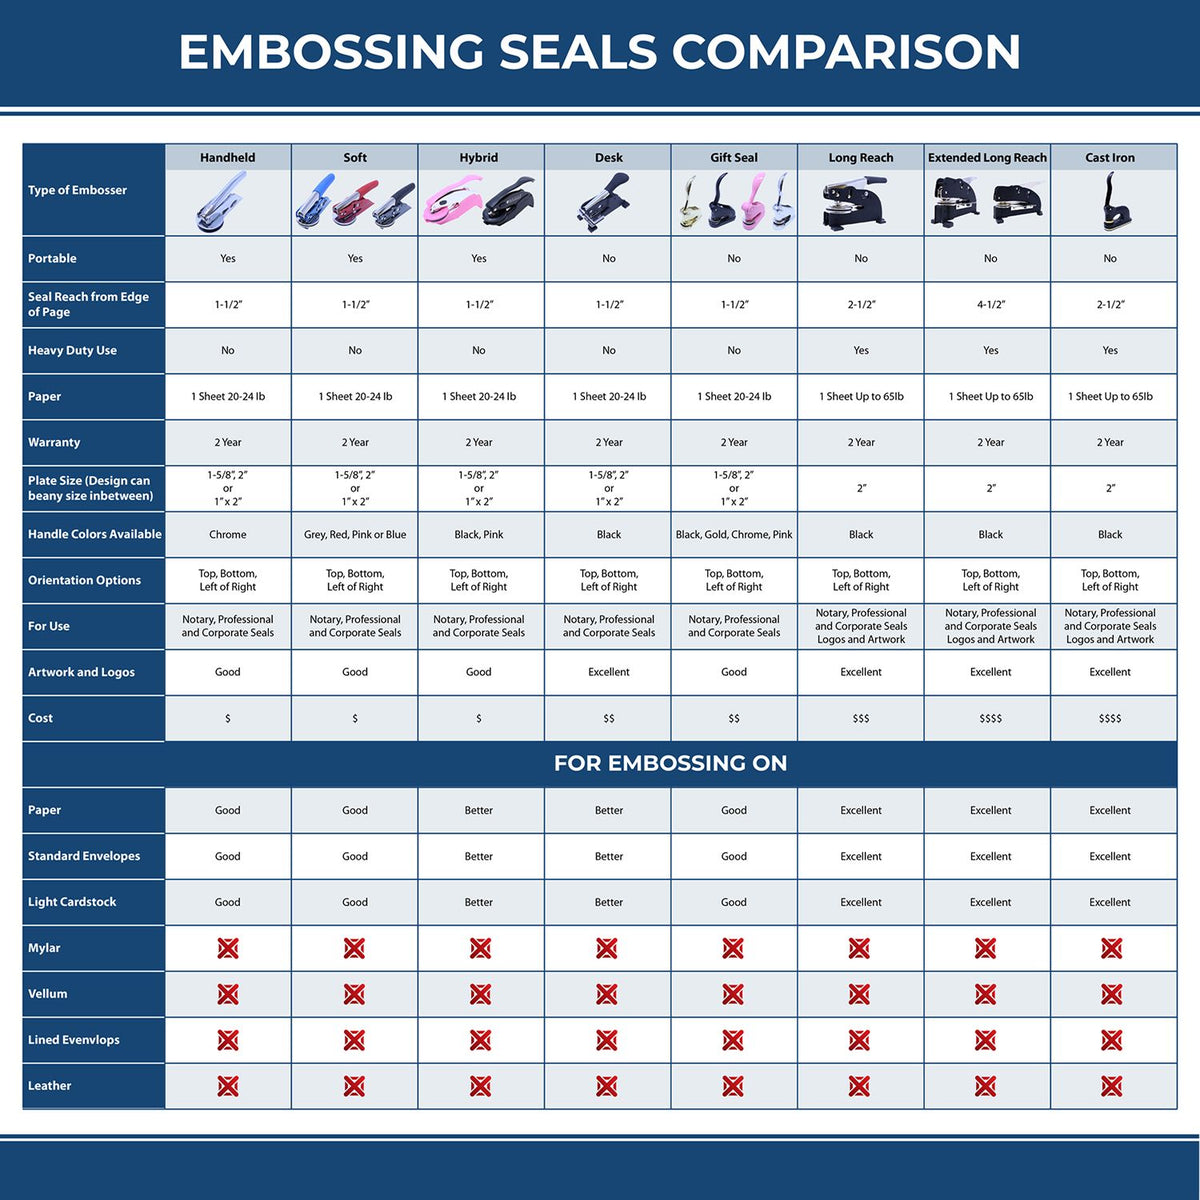 A comparison chart for the different types of mount models available for the Soft New Hampshire Professional Geologist Seal